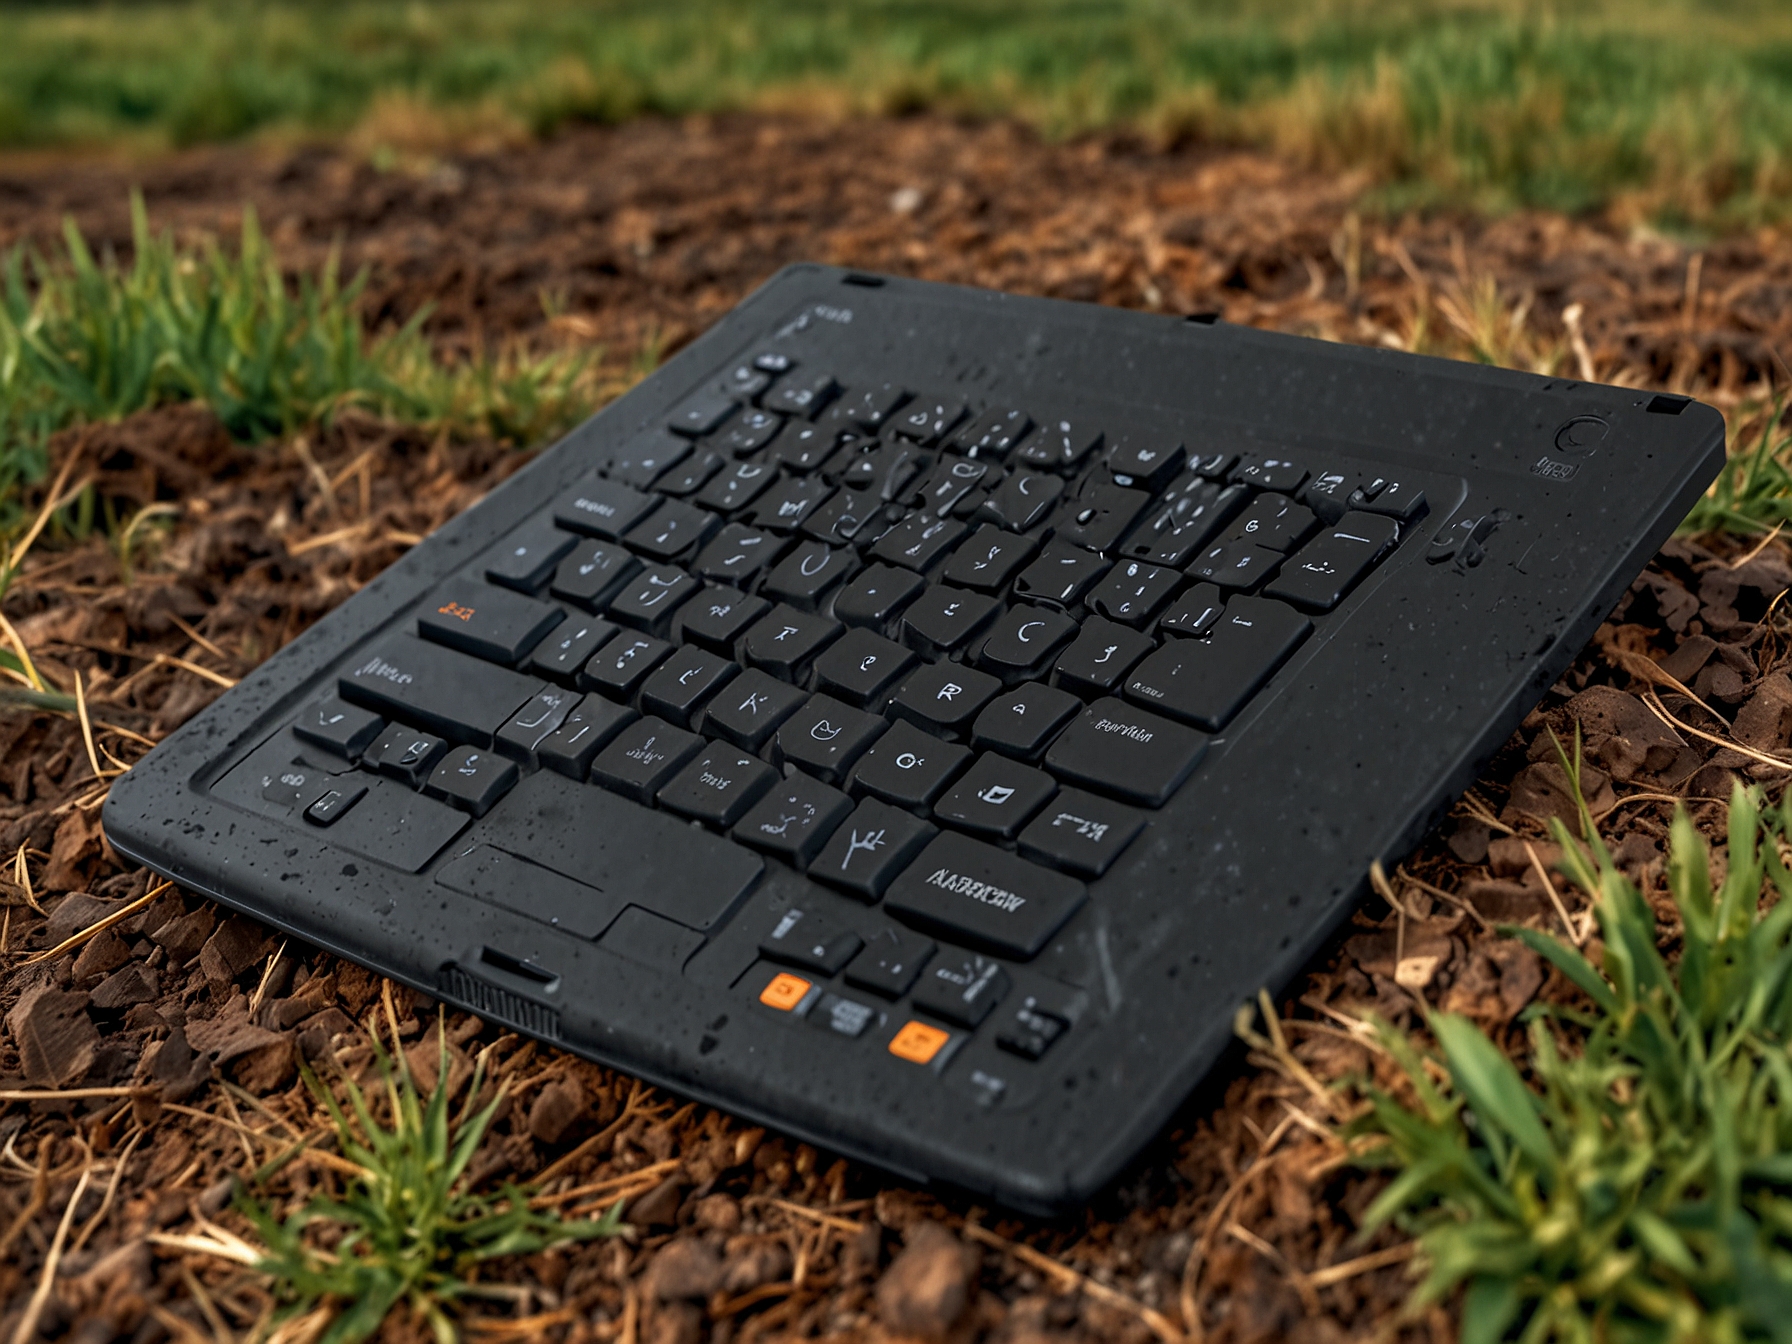 A close-up image of the Durabook S15 keyboard, demonstrating its spill-resistant design, with the laptop in a field environment, highlighting its robustness and MIL-STD-810G durability standards.